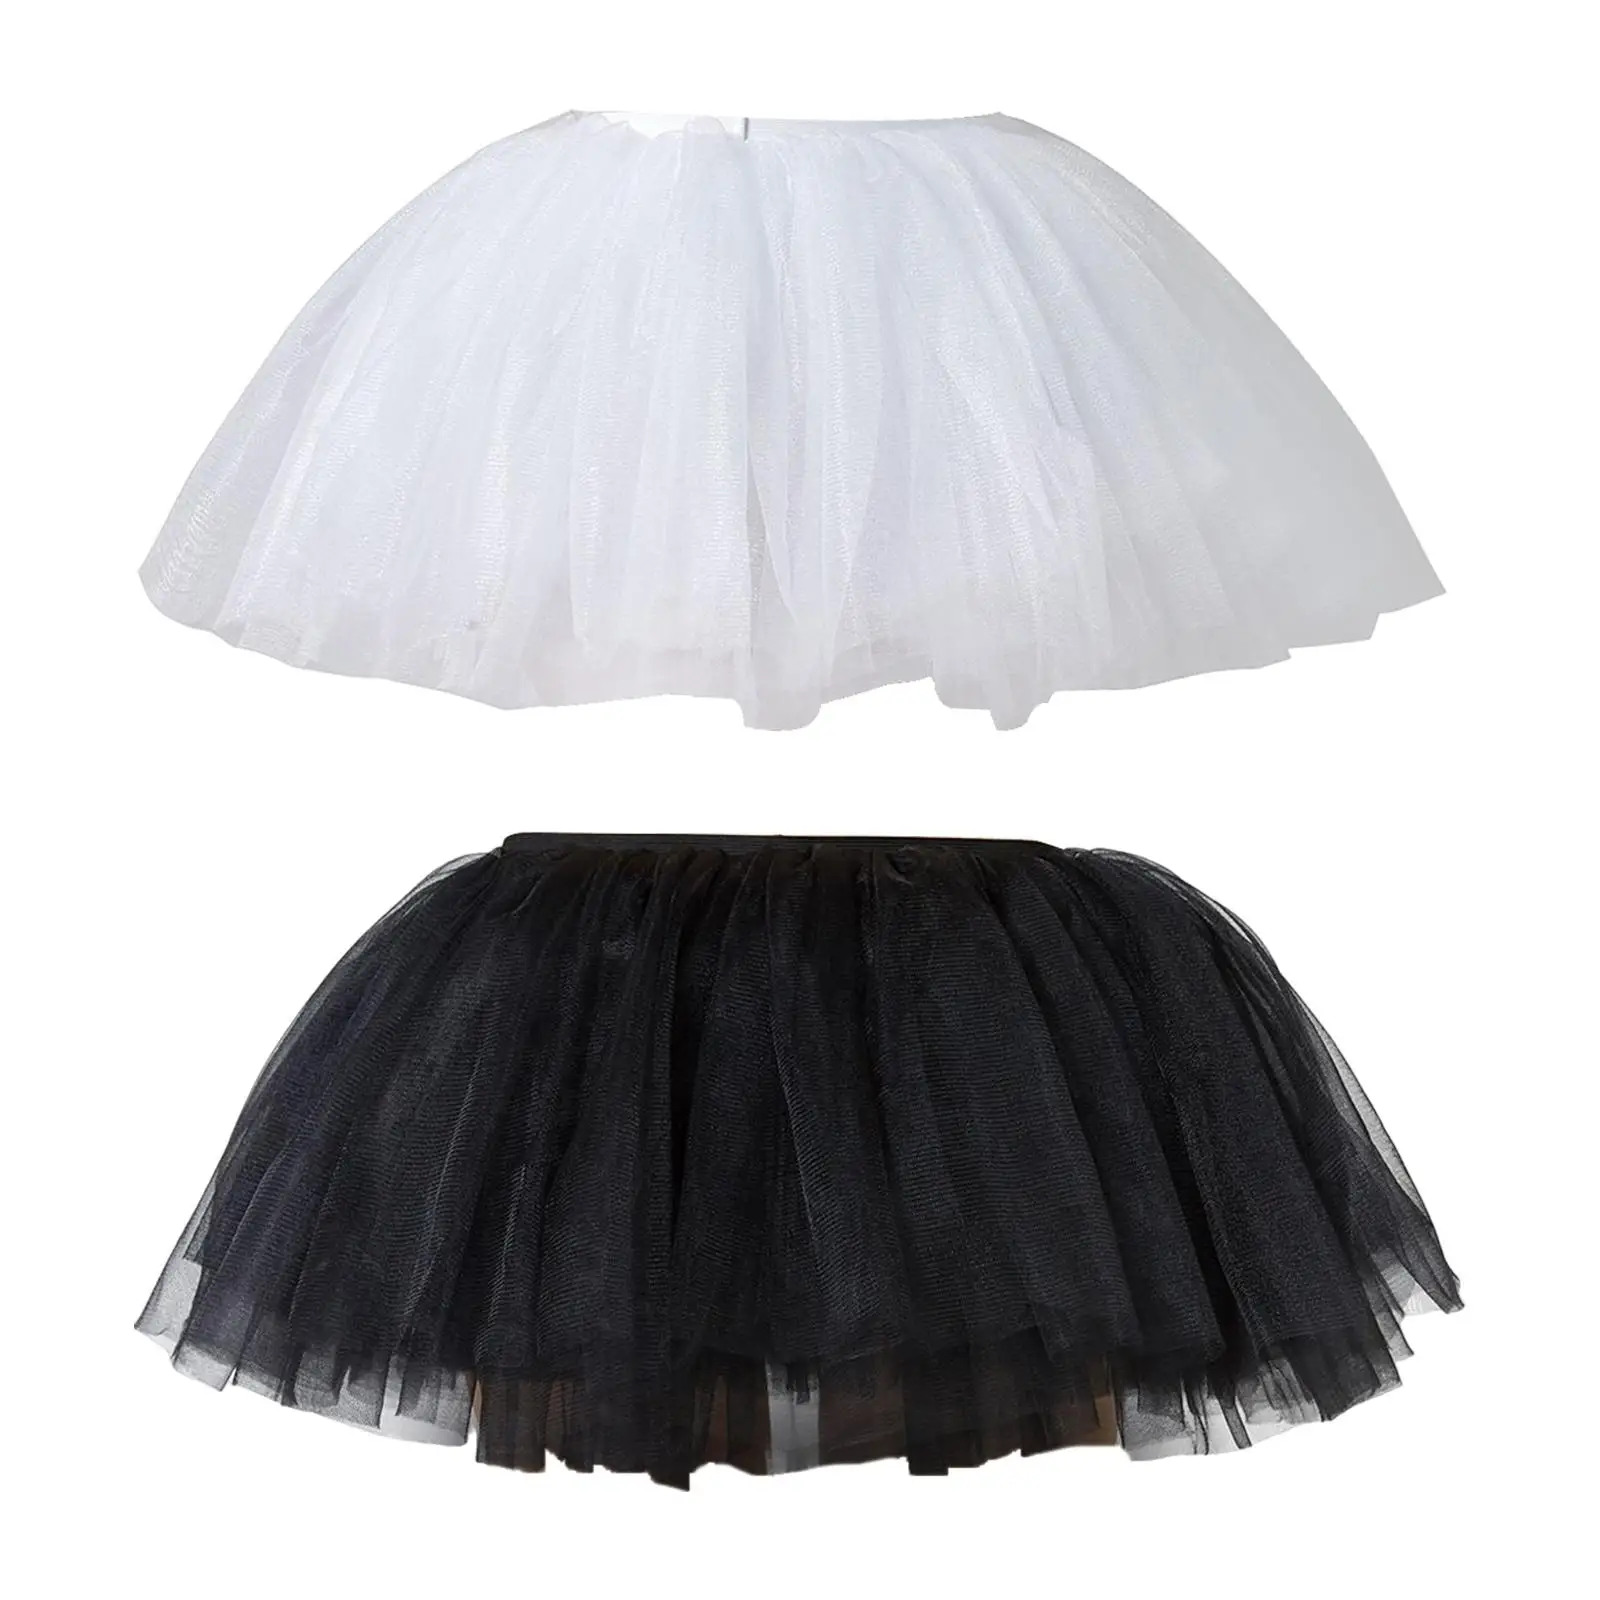 Women Tulle Tutu Skirt Cosplay Supplies Party Costume Adults Dress Tulle Petticoat for Beach Outfit Wedding Concert Performance